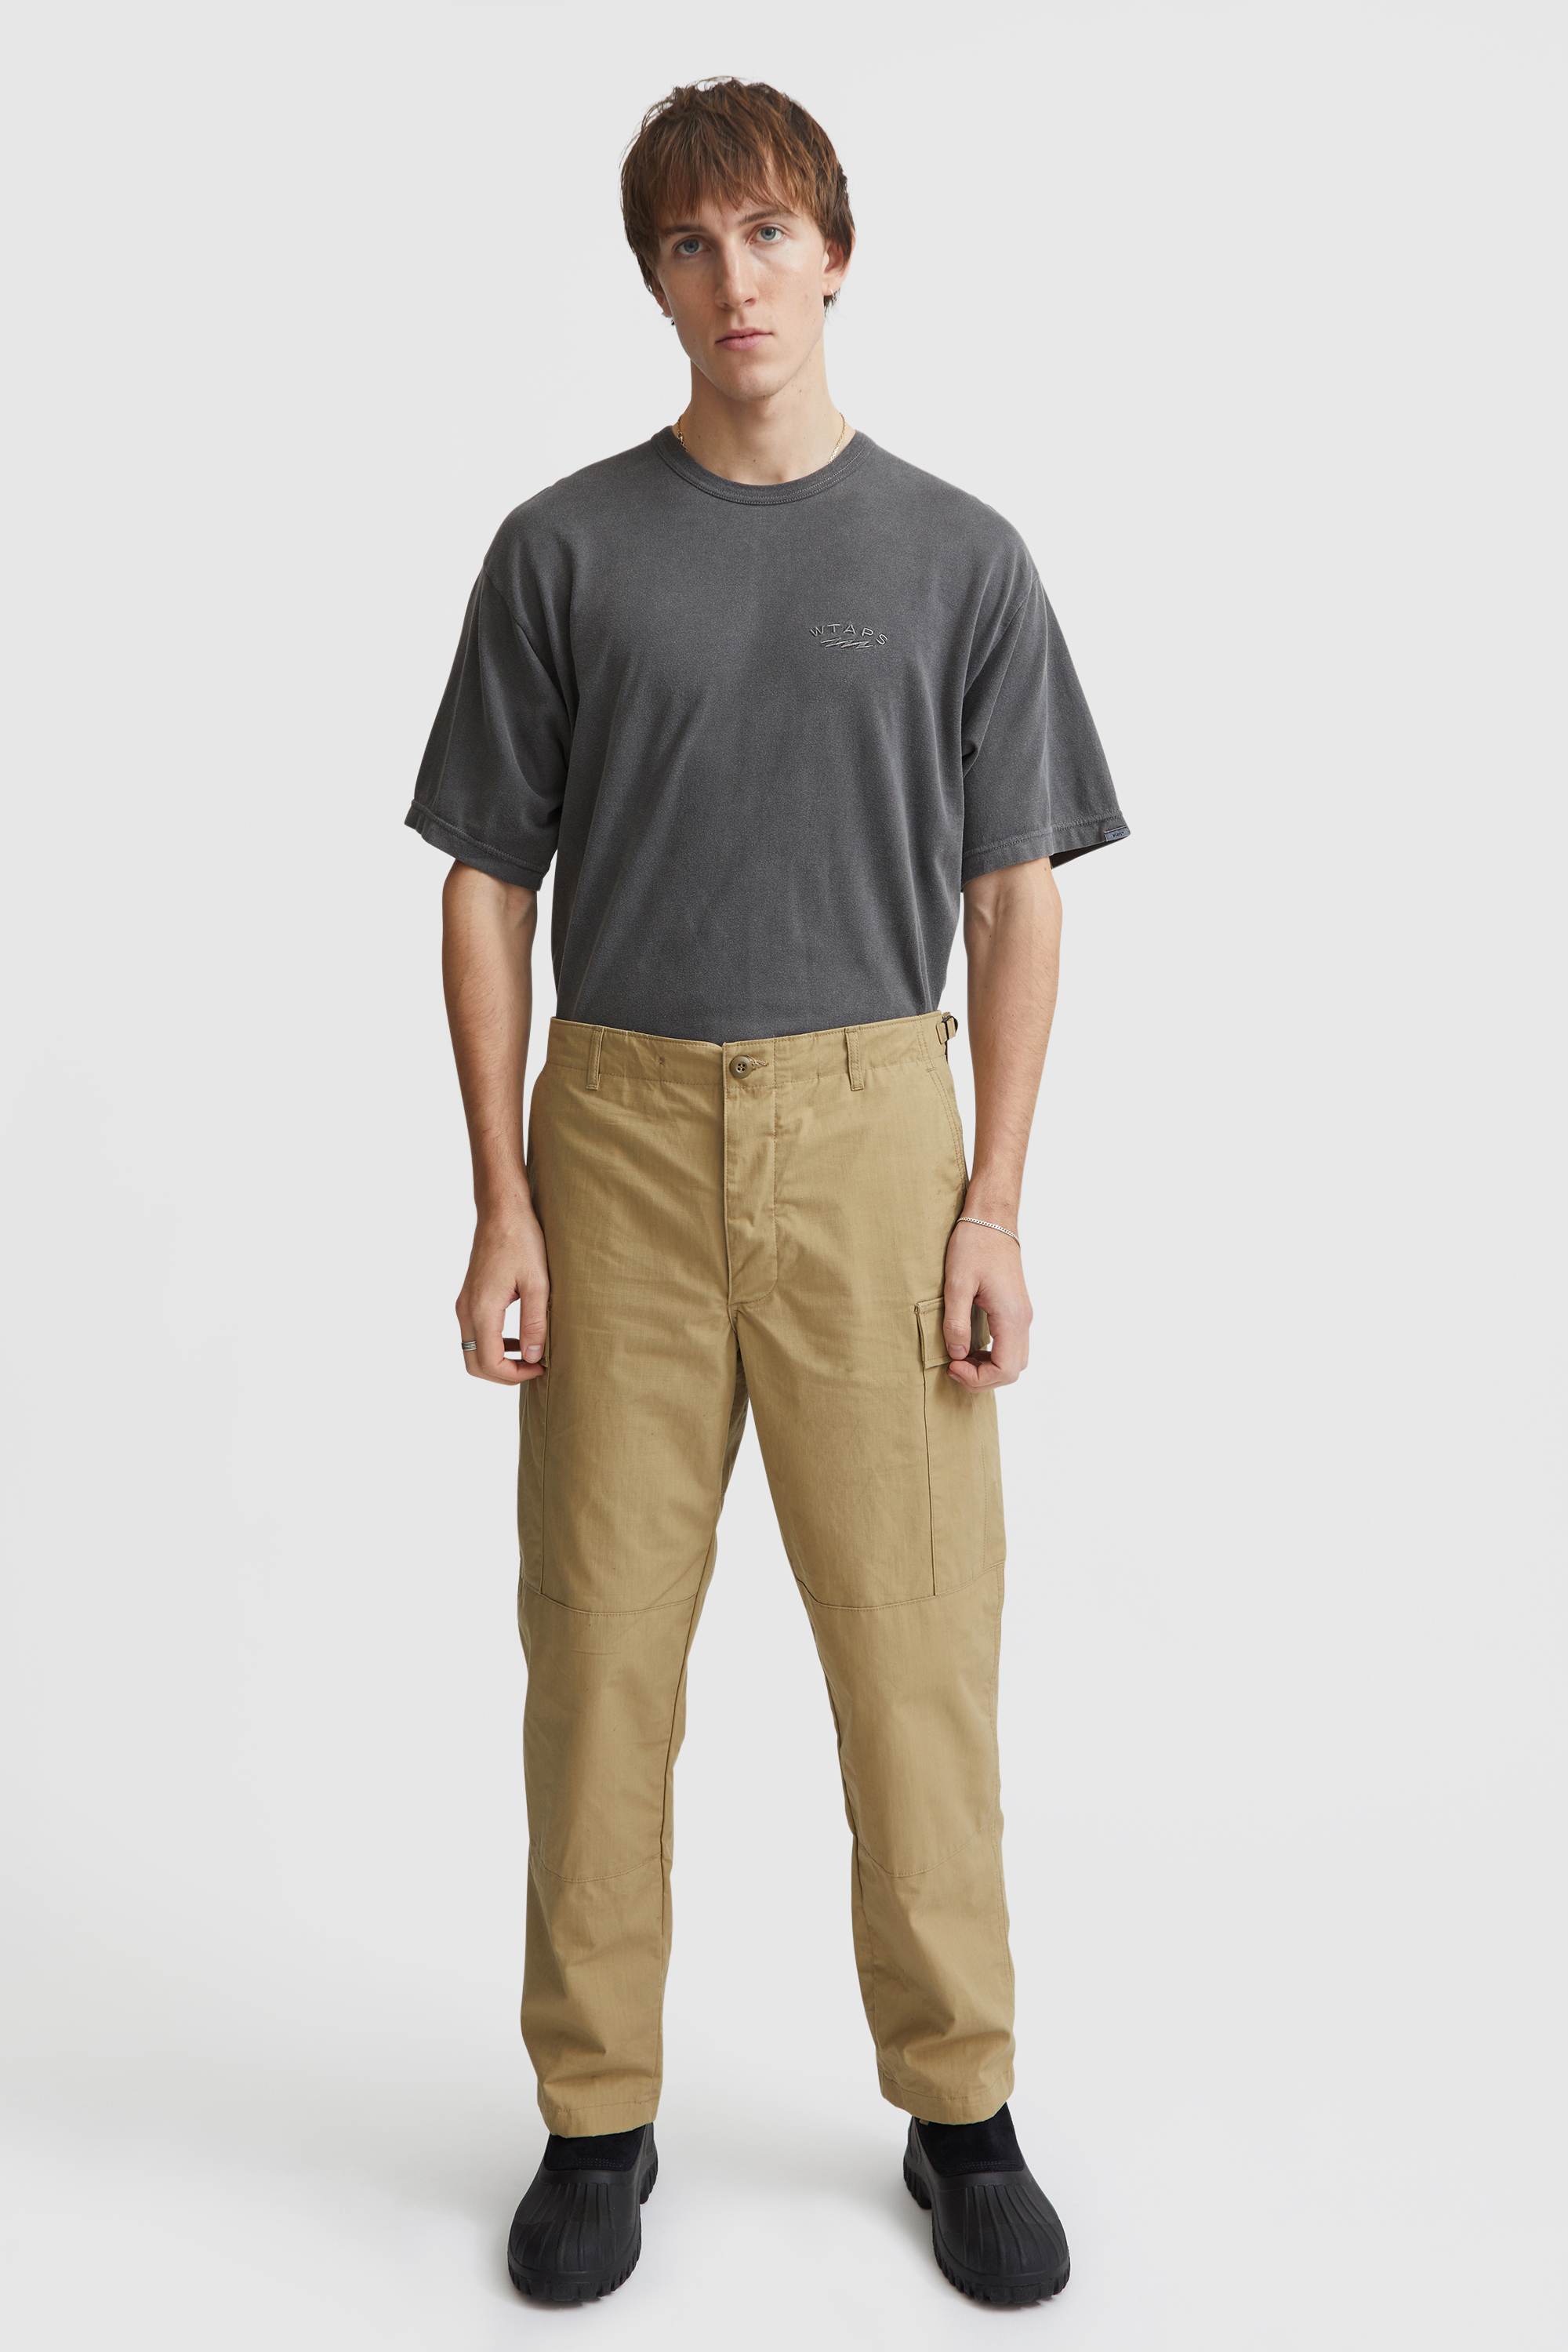 WMILL-Trouser 01/Nyco. Ripstop